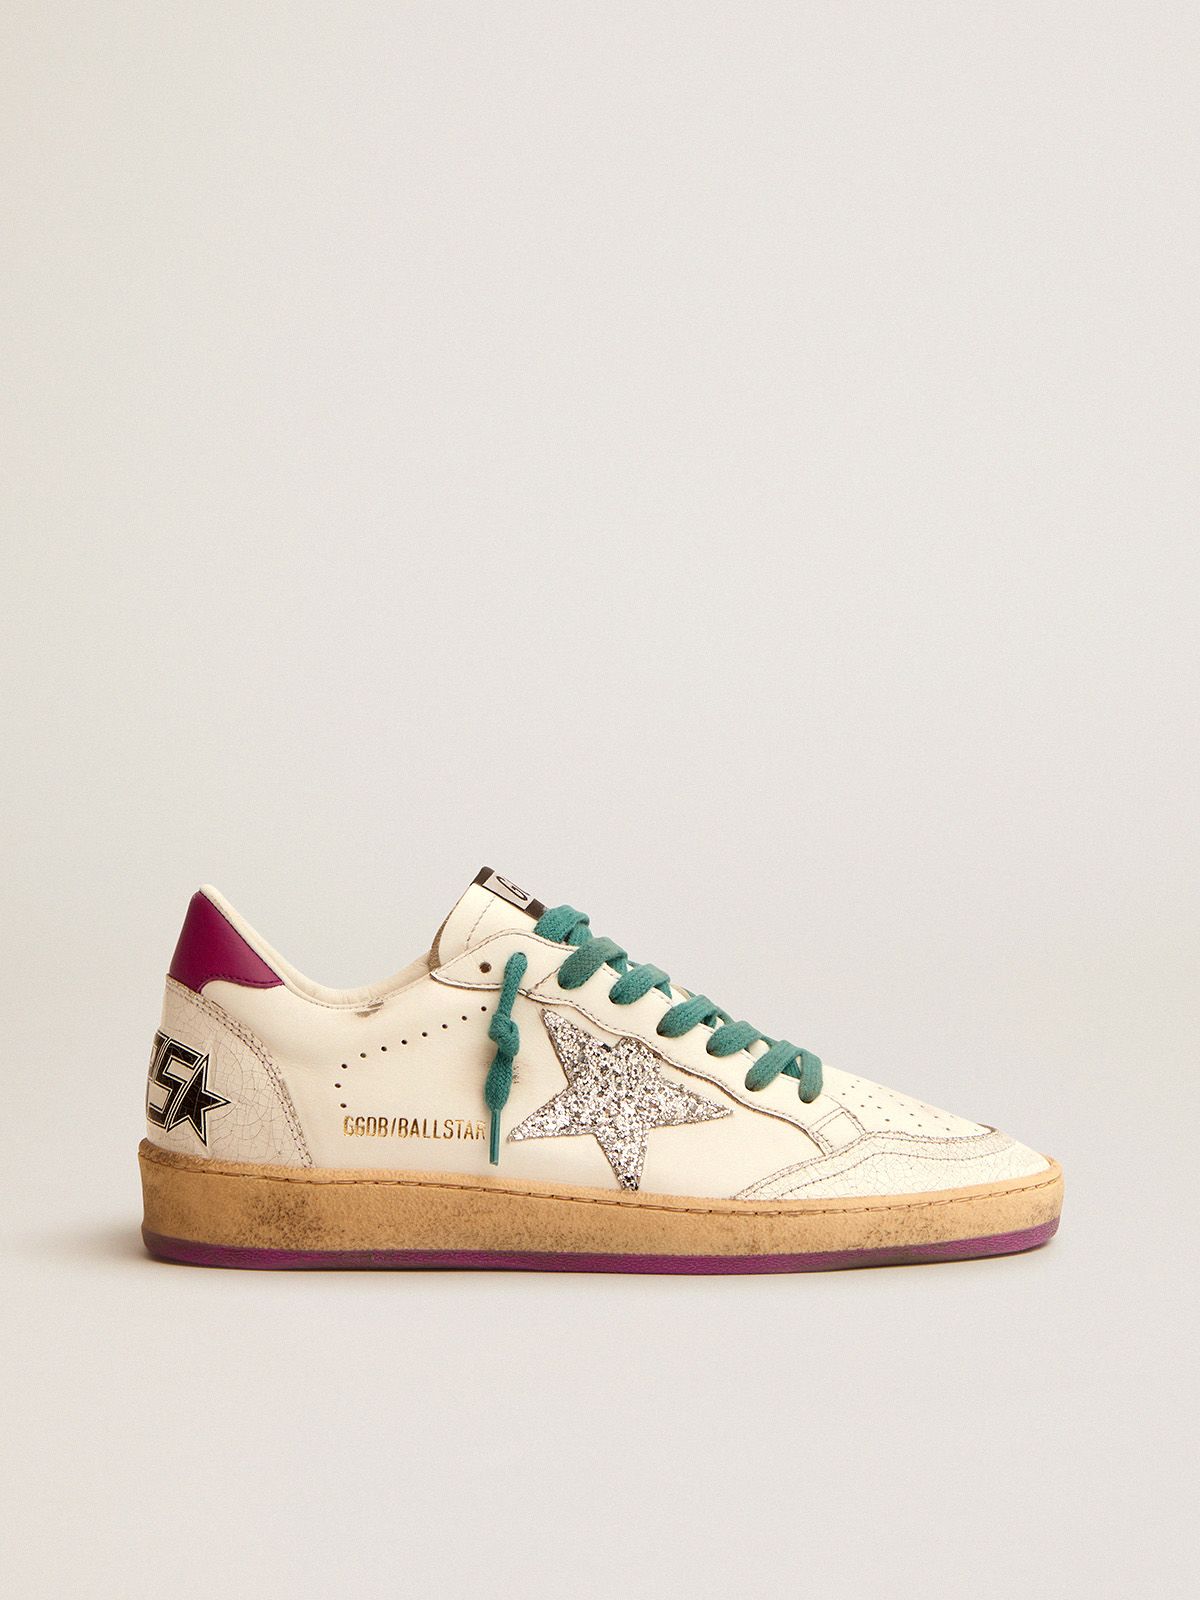 Ball Star LTD sneakers in white leather with purple leather heel tab and silver glitter star | 